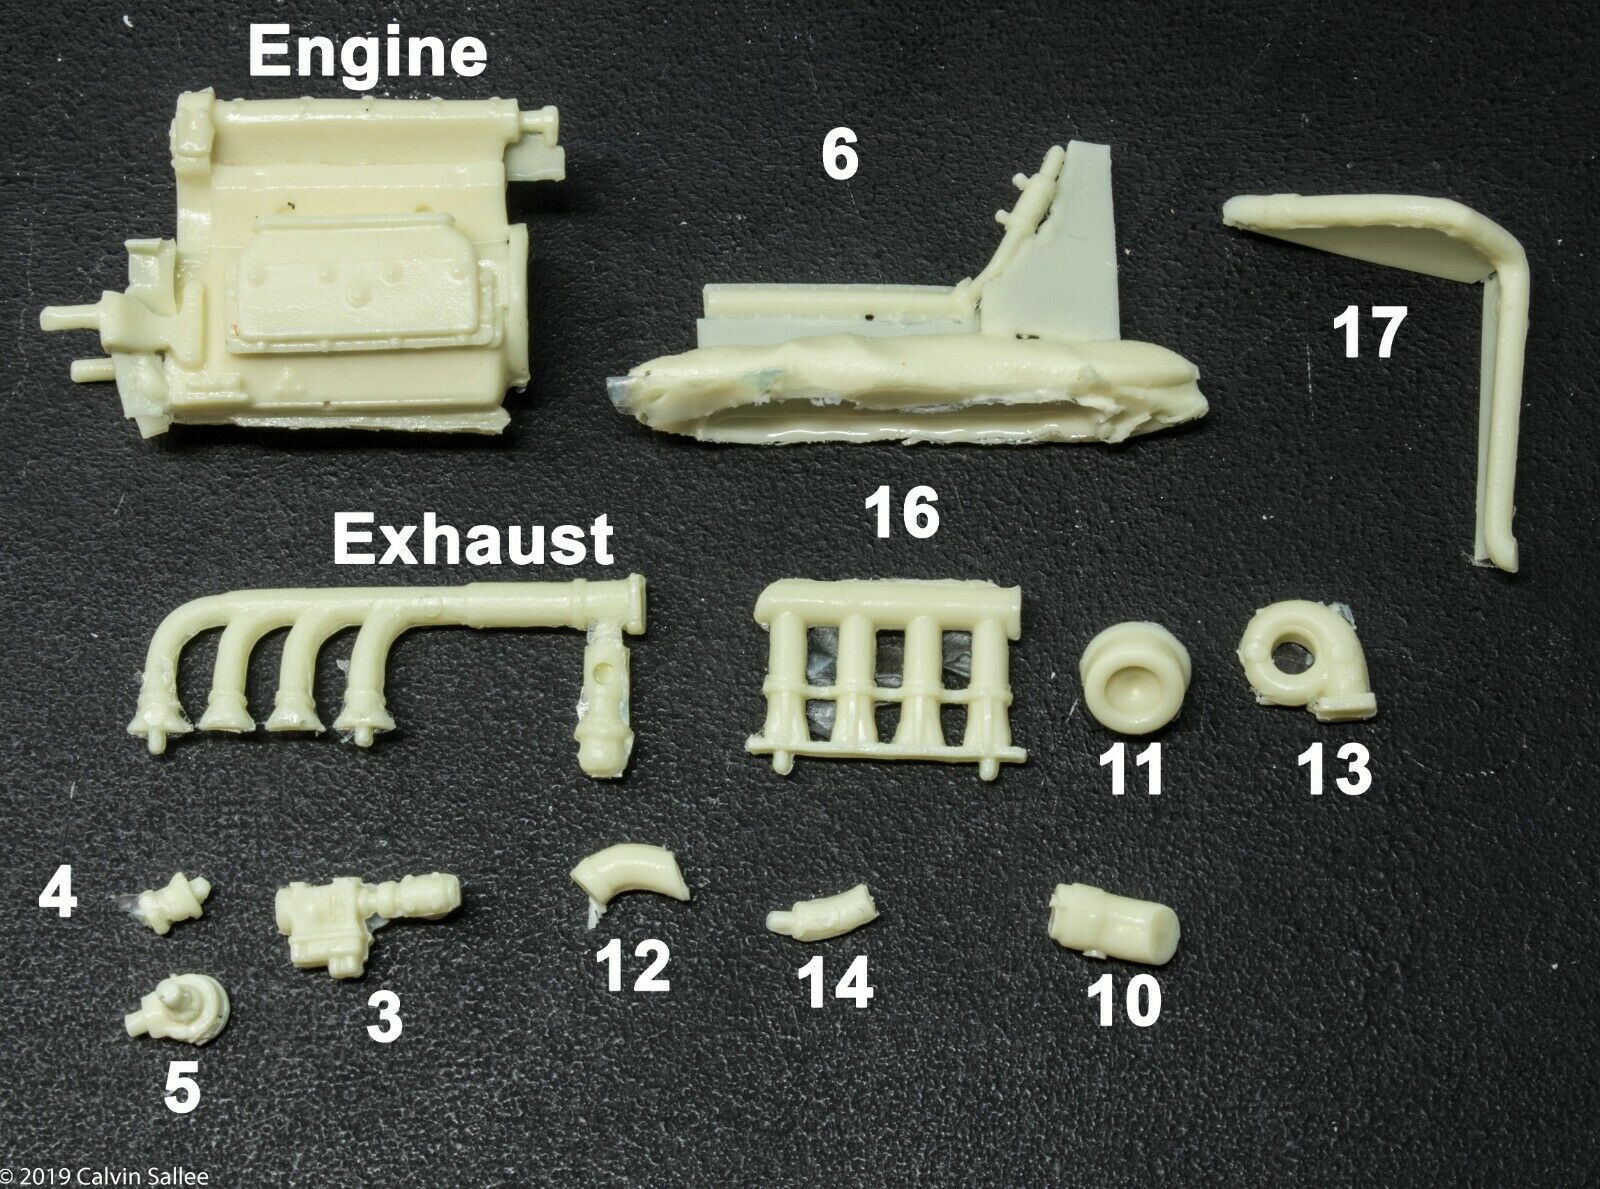 1/25 Rear Offenhauser Resin Engine W/ Parts Rear Engine Setup Mpc Amt Indy